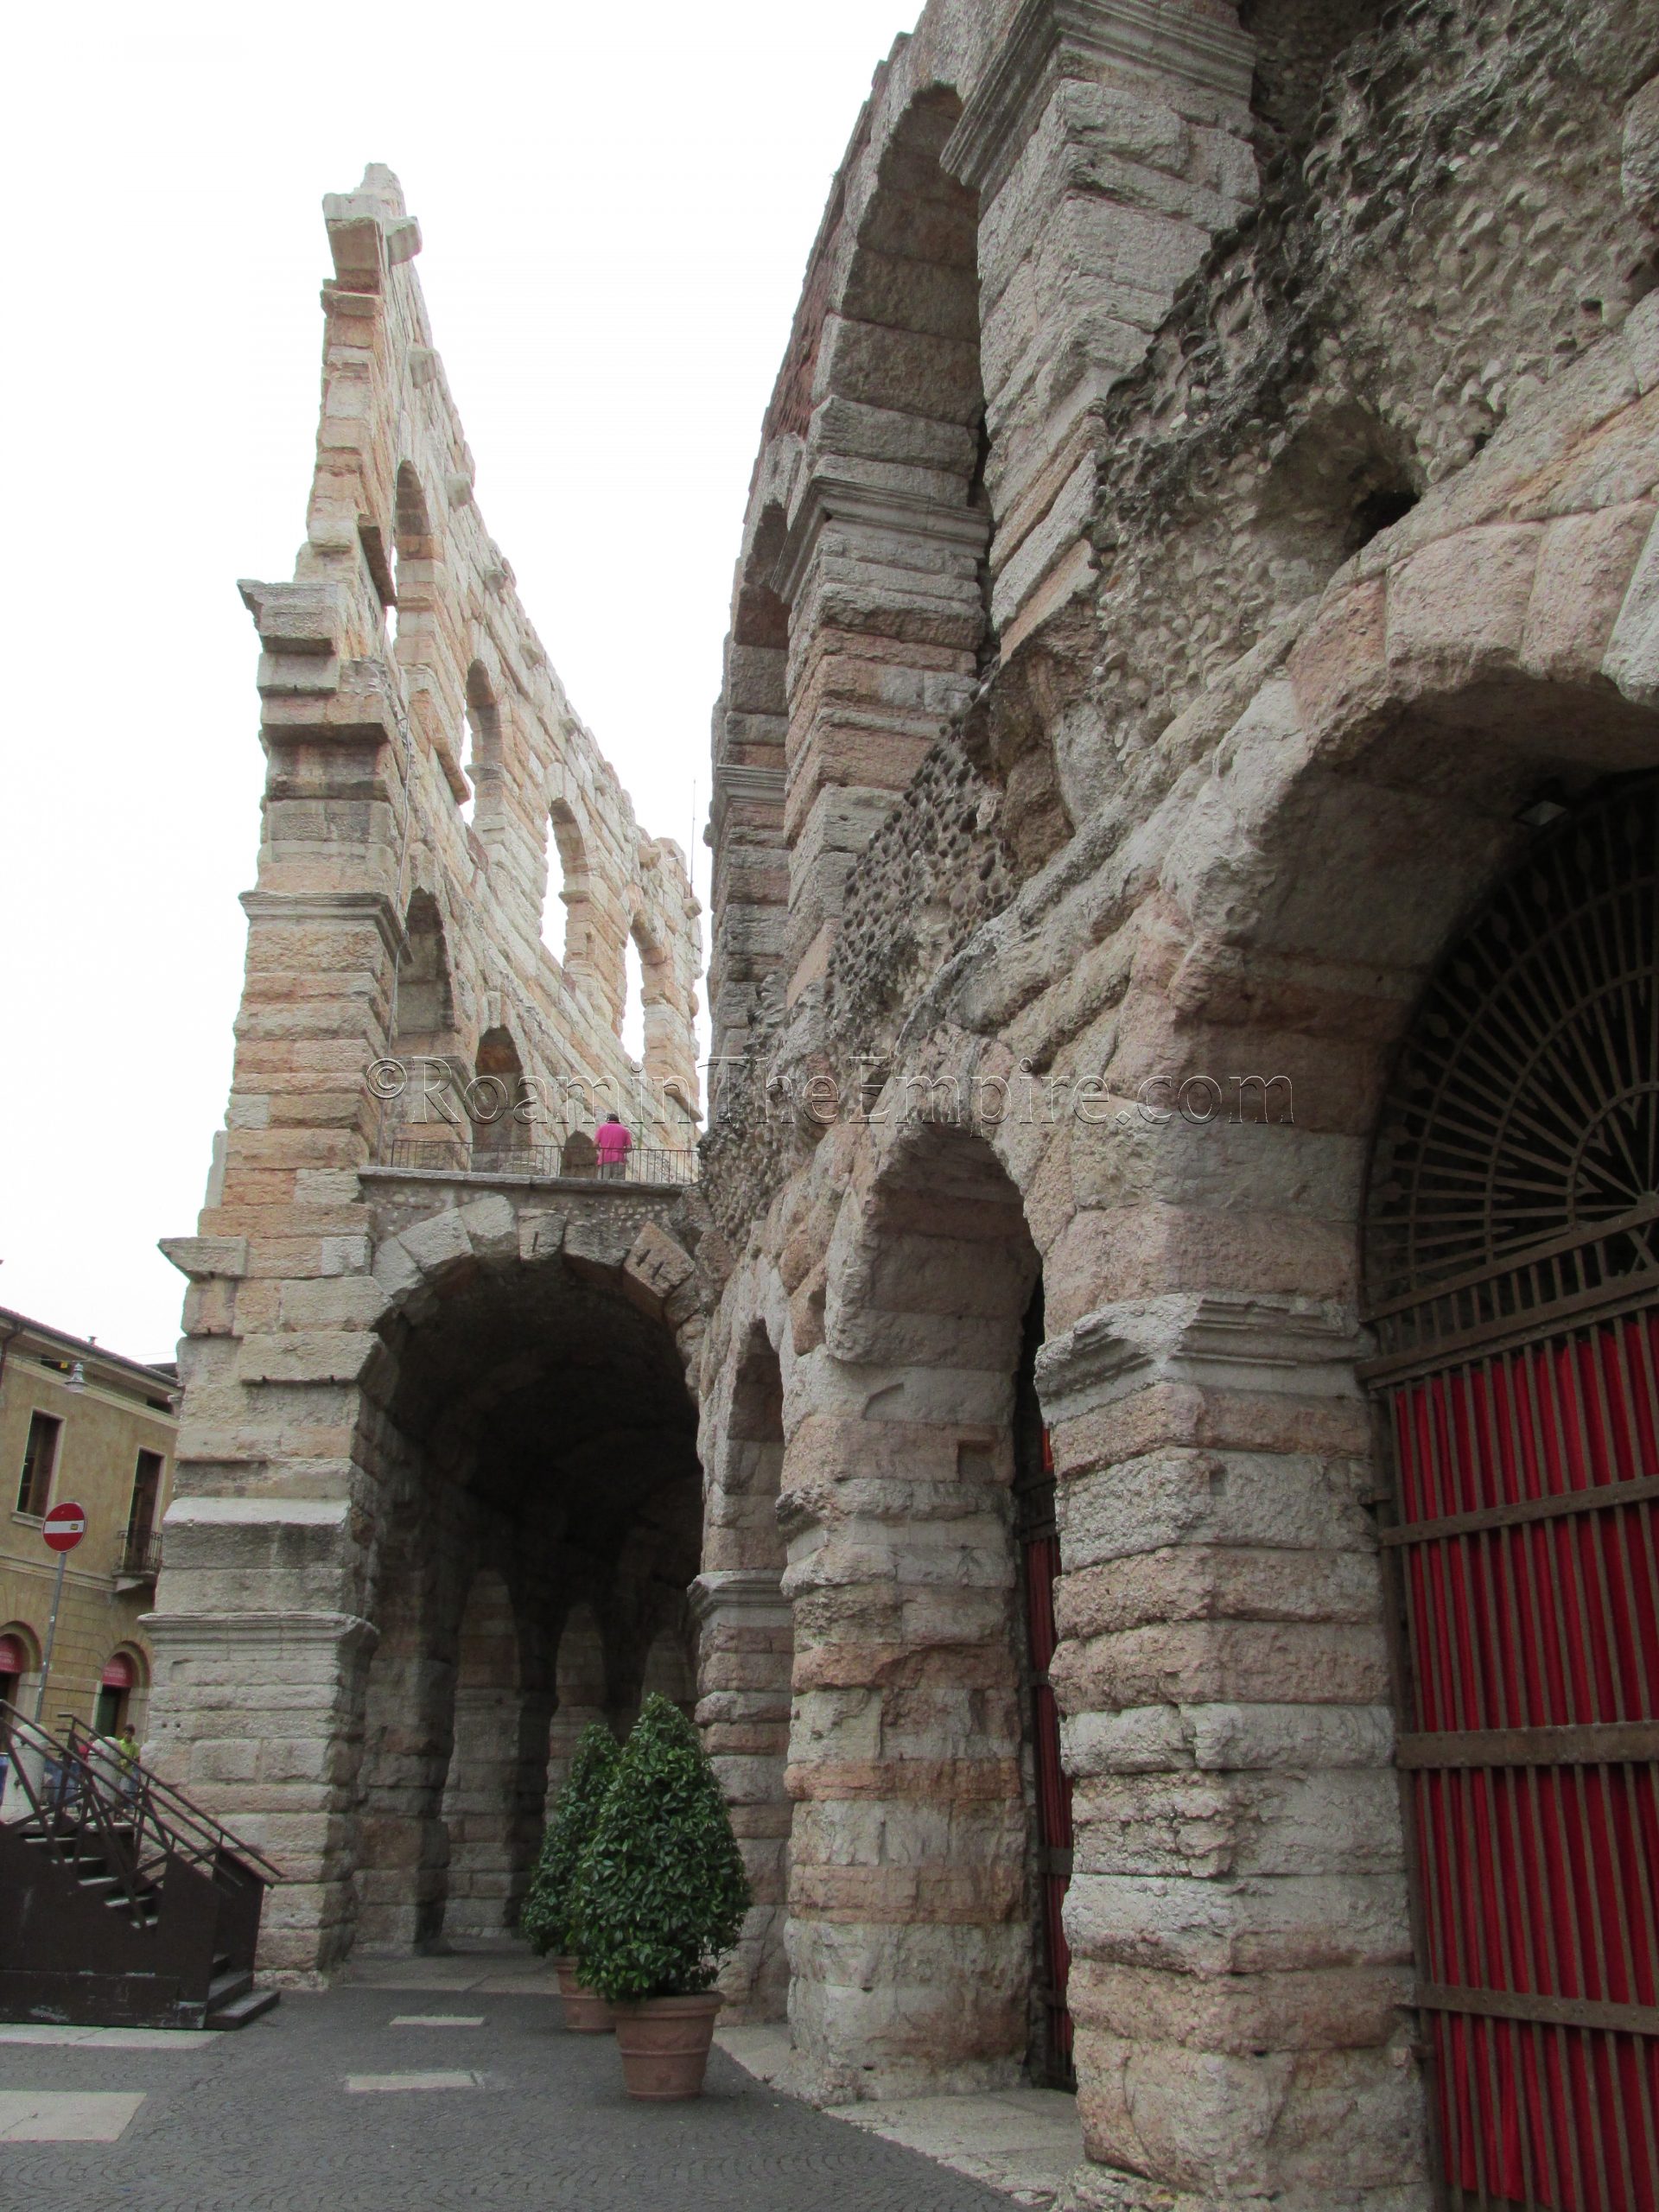 Small remaining section of the outer walls of the amphitheater. Verona.